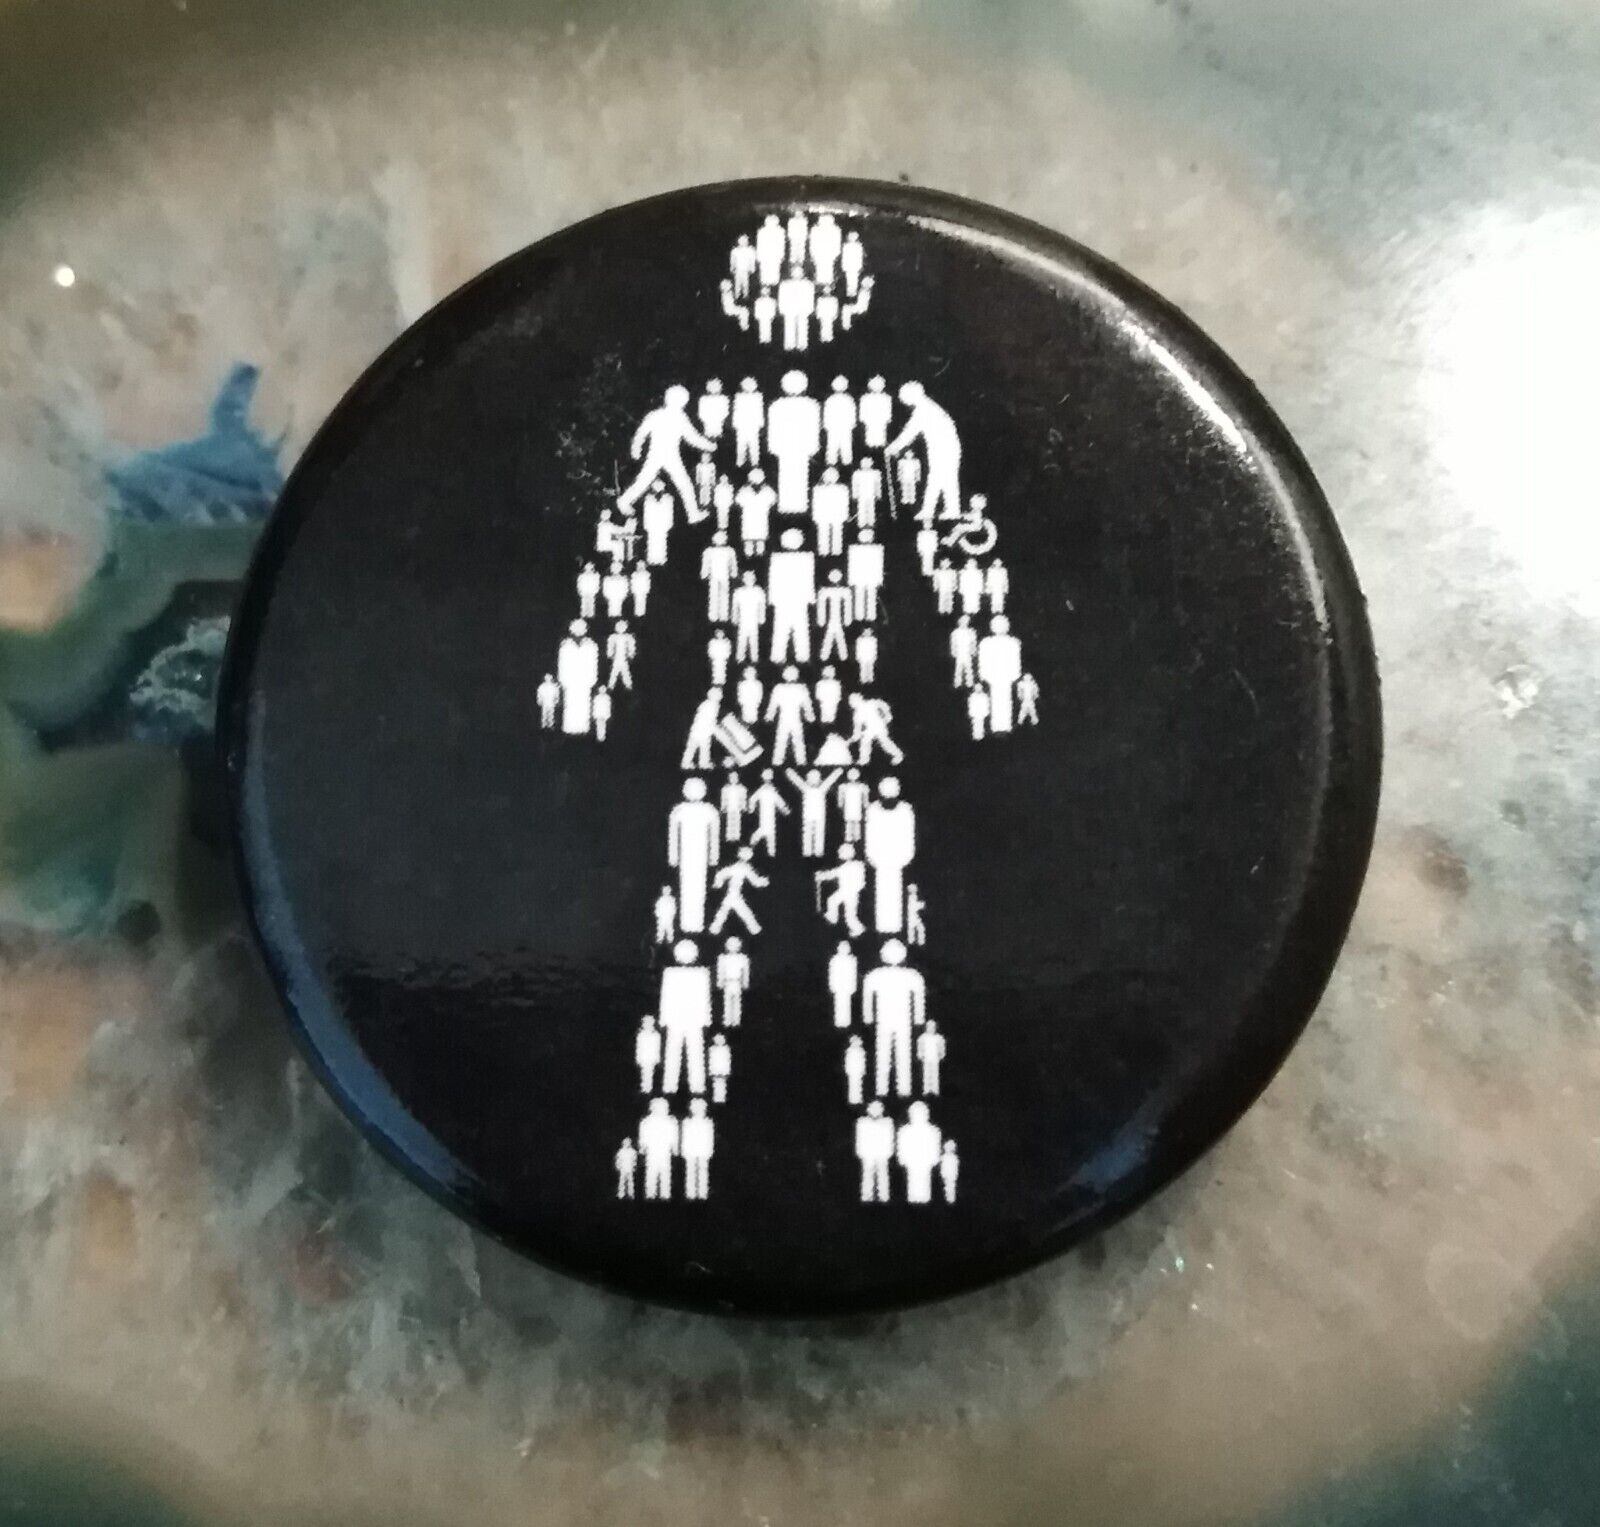 BRAND NEW Prostate Cancer UK  32mm BUTTON BADGE. 